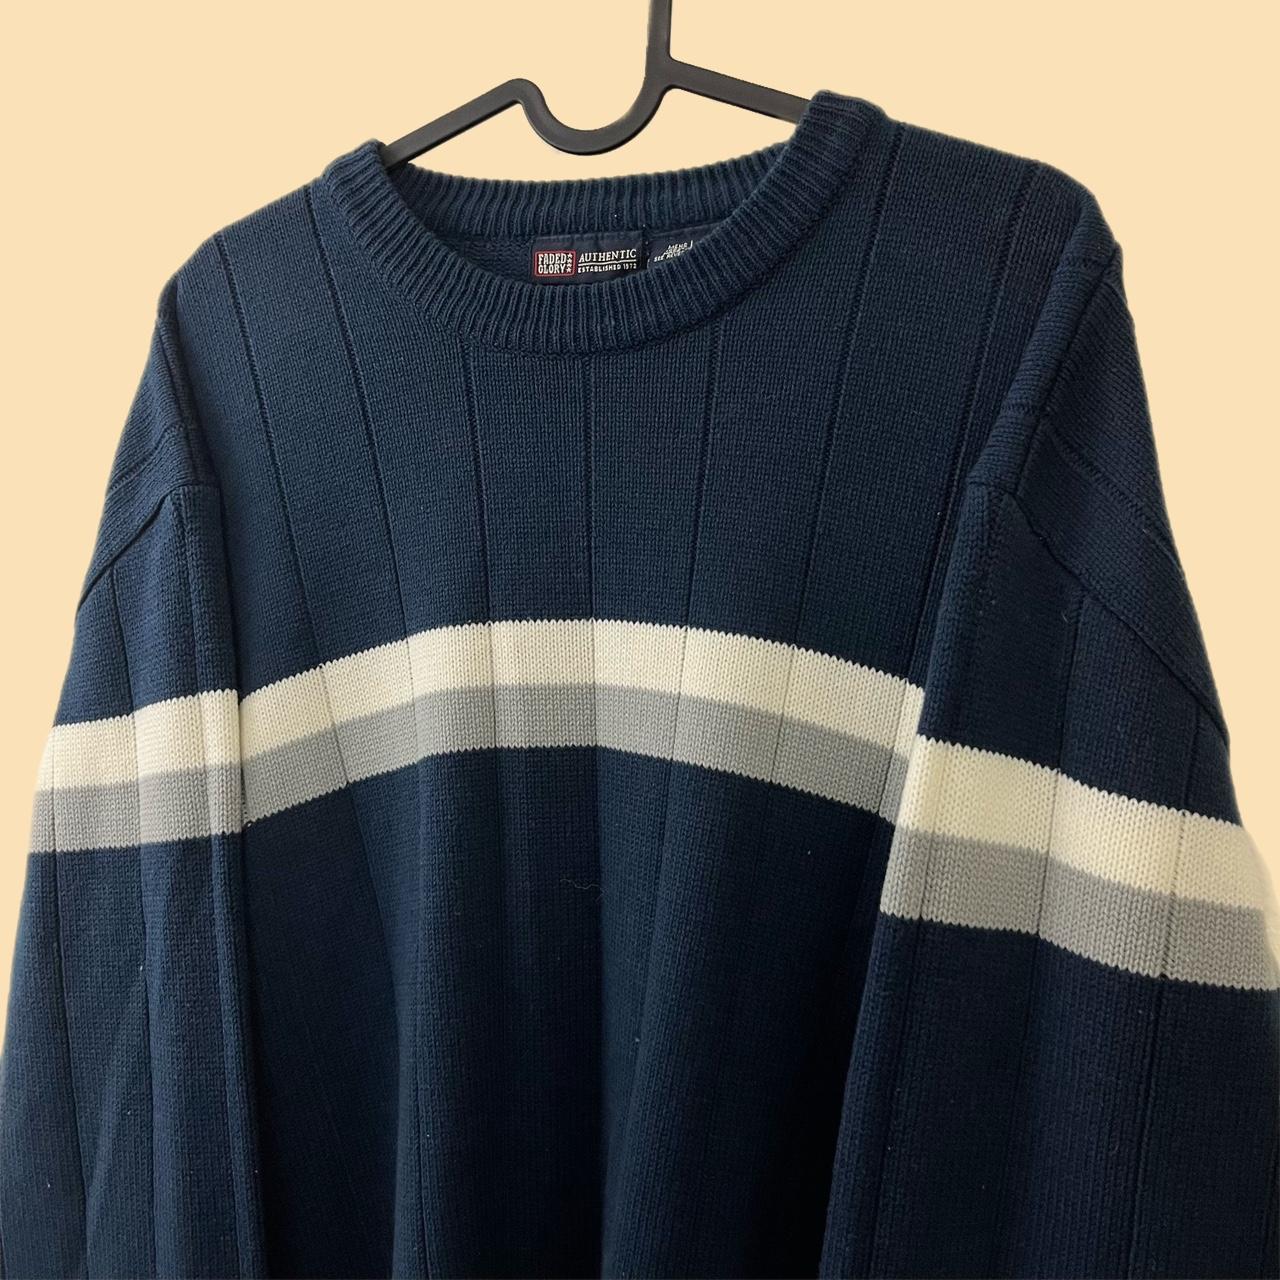 Faded Glory Men's Blue and Navy Jumper